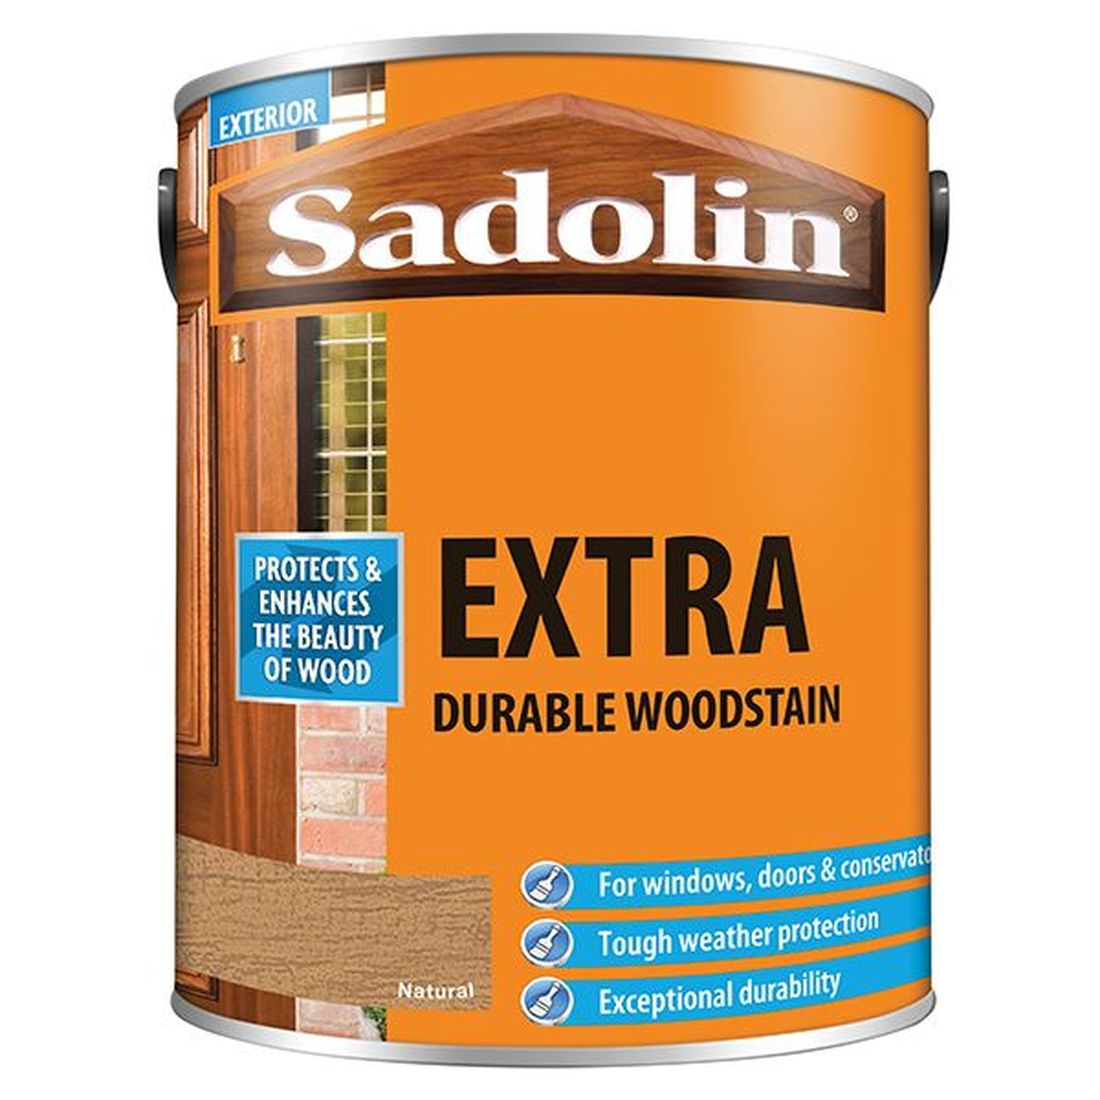 Sadolin Extra Durable Woodstain Natural 5 litre                                         